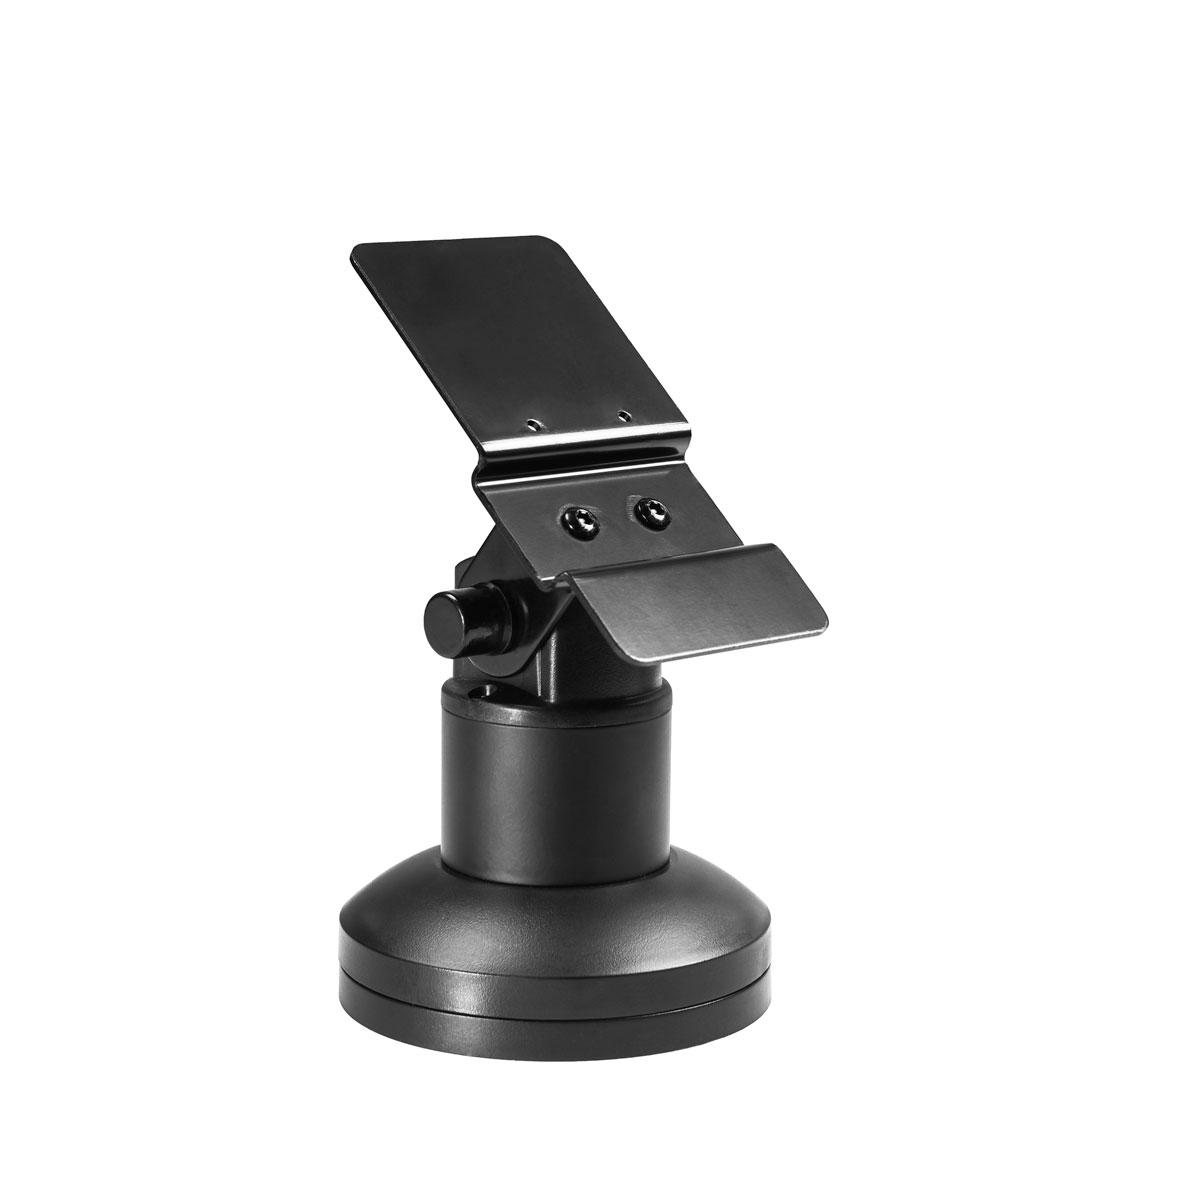 Verifone P200/P400 Contour Mural Stand Holder